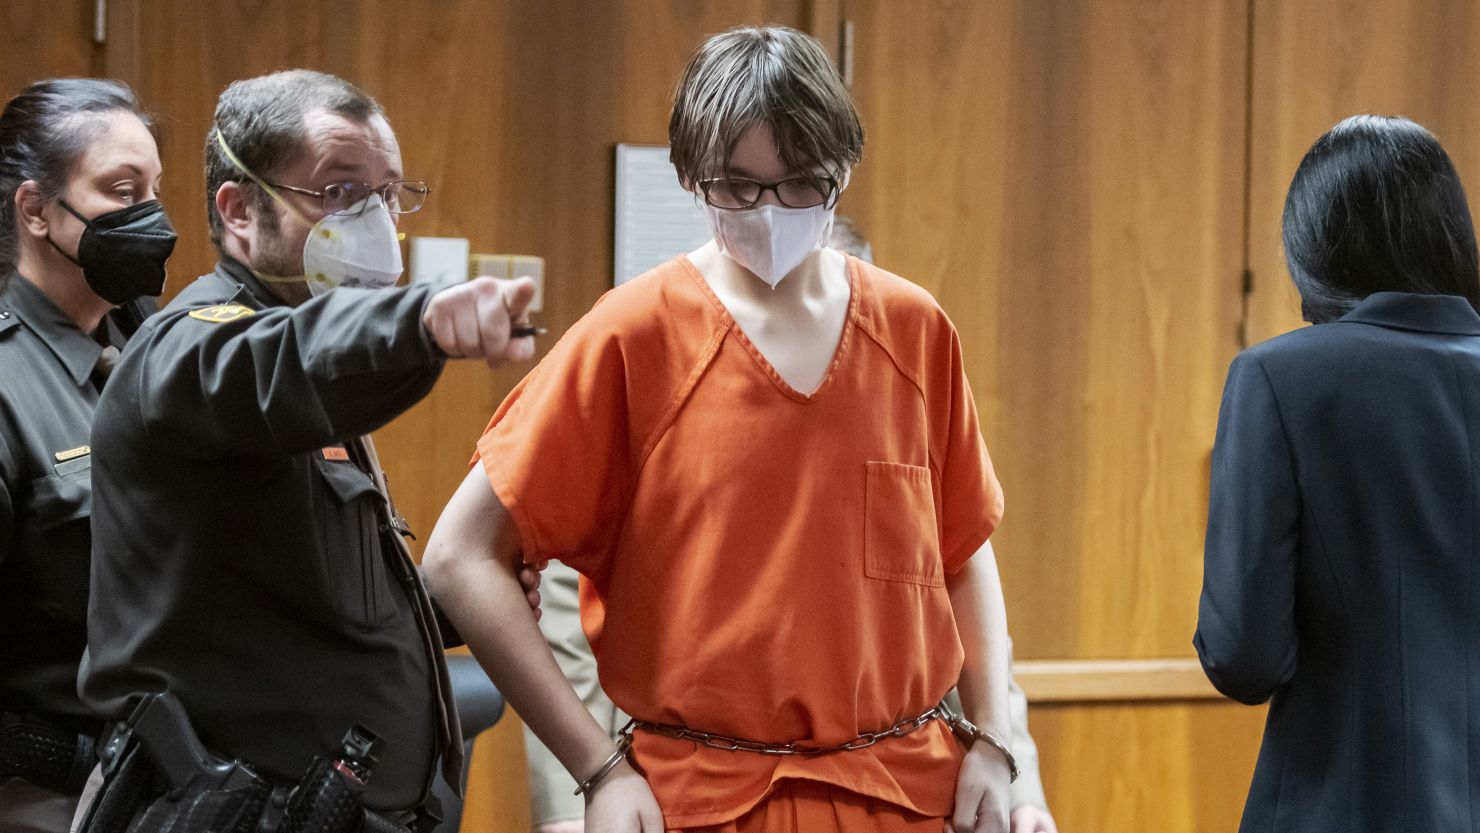 Ethan Crumbley, 15, is charged with the fatal shooting of four fellow students and the wounding of seven others at Oxford High School on November 30, 2021.